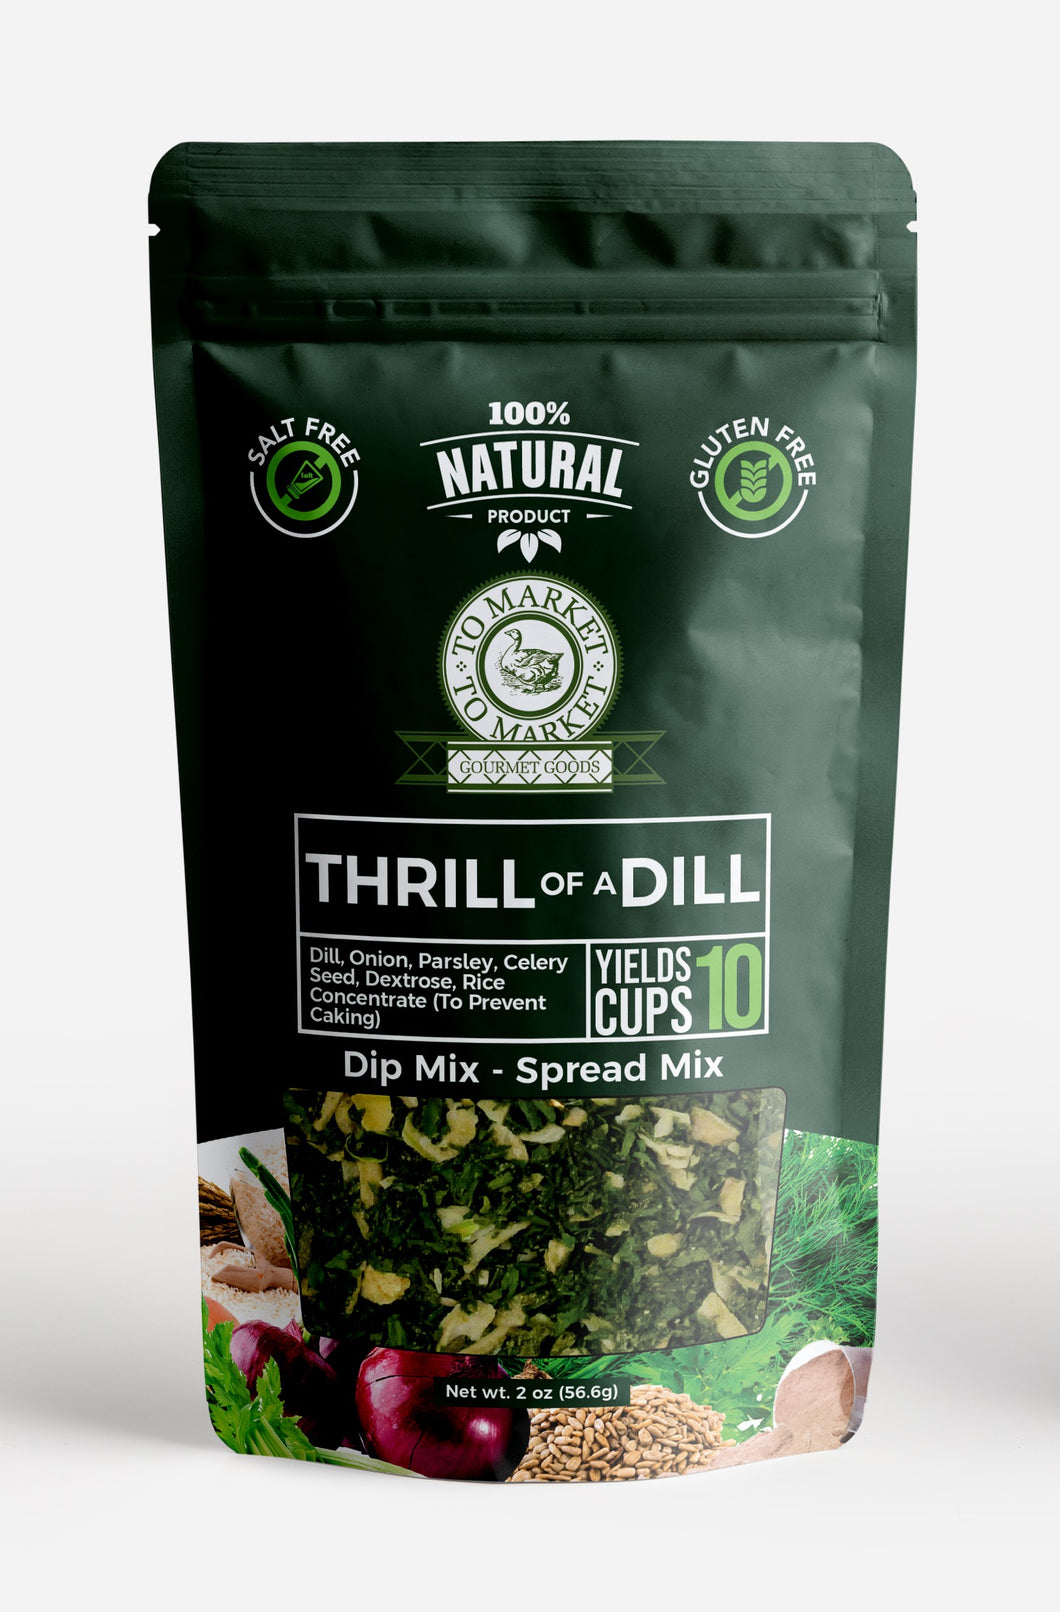 Thrill of a Dill - Dip Mix